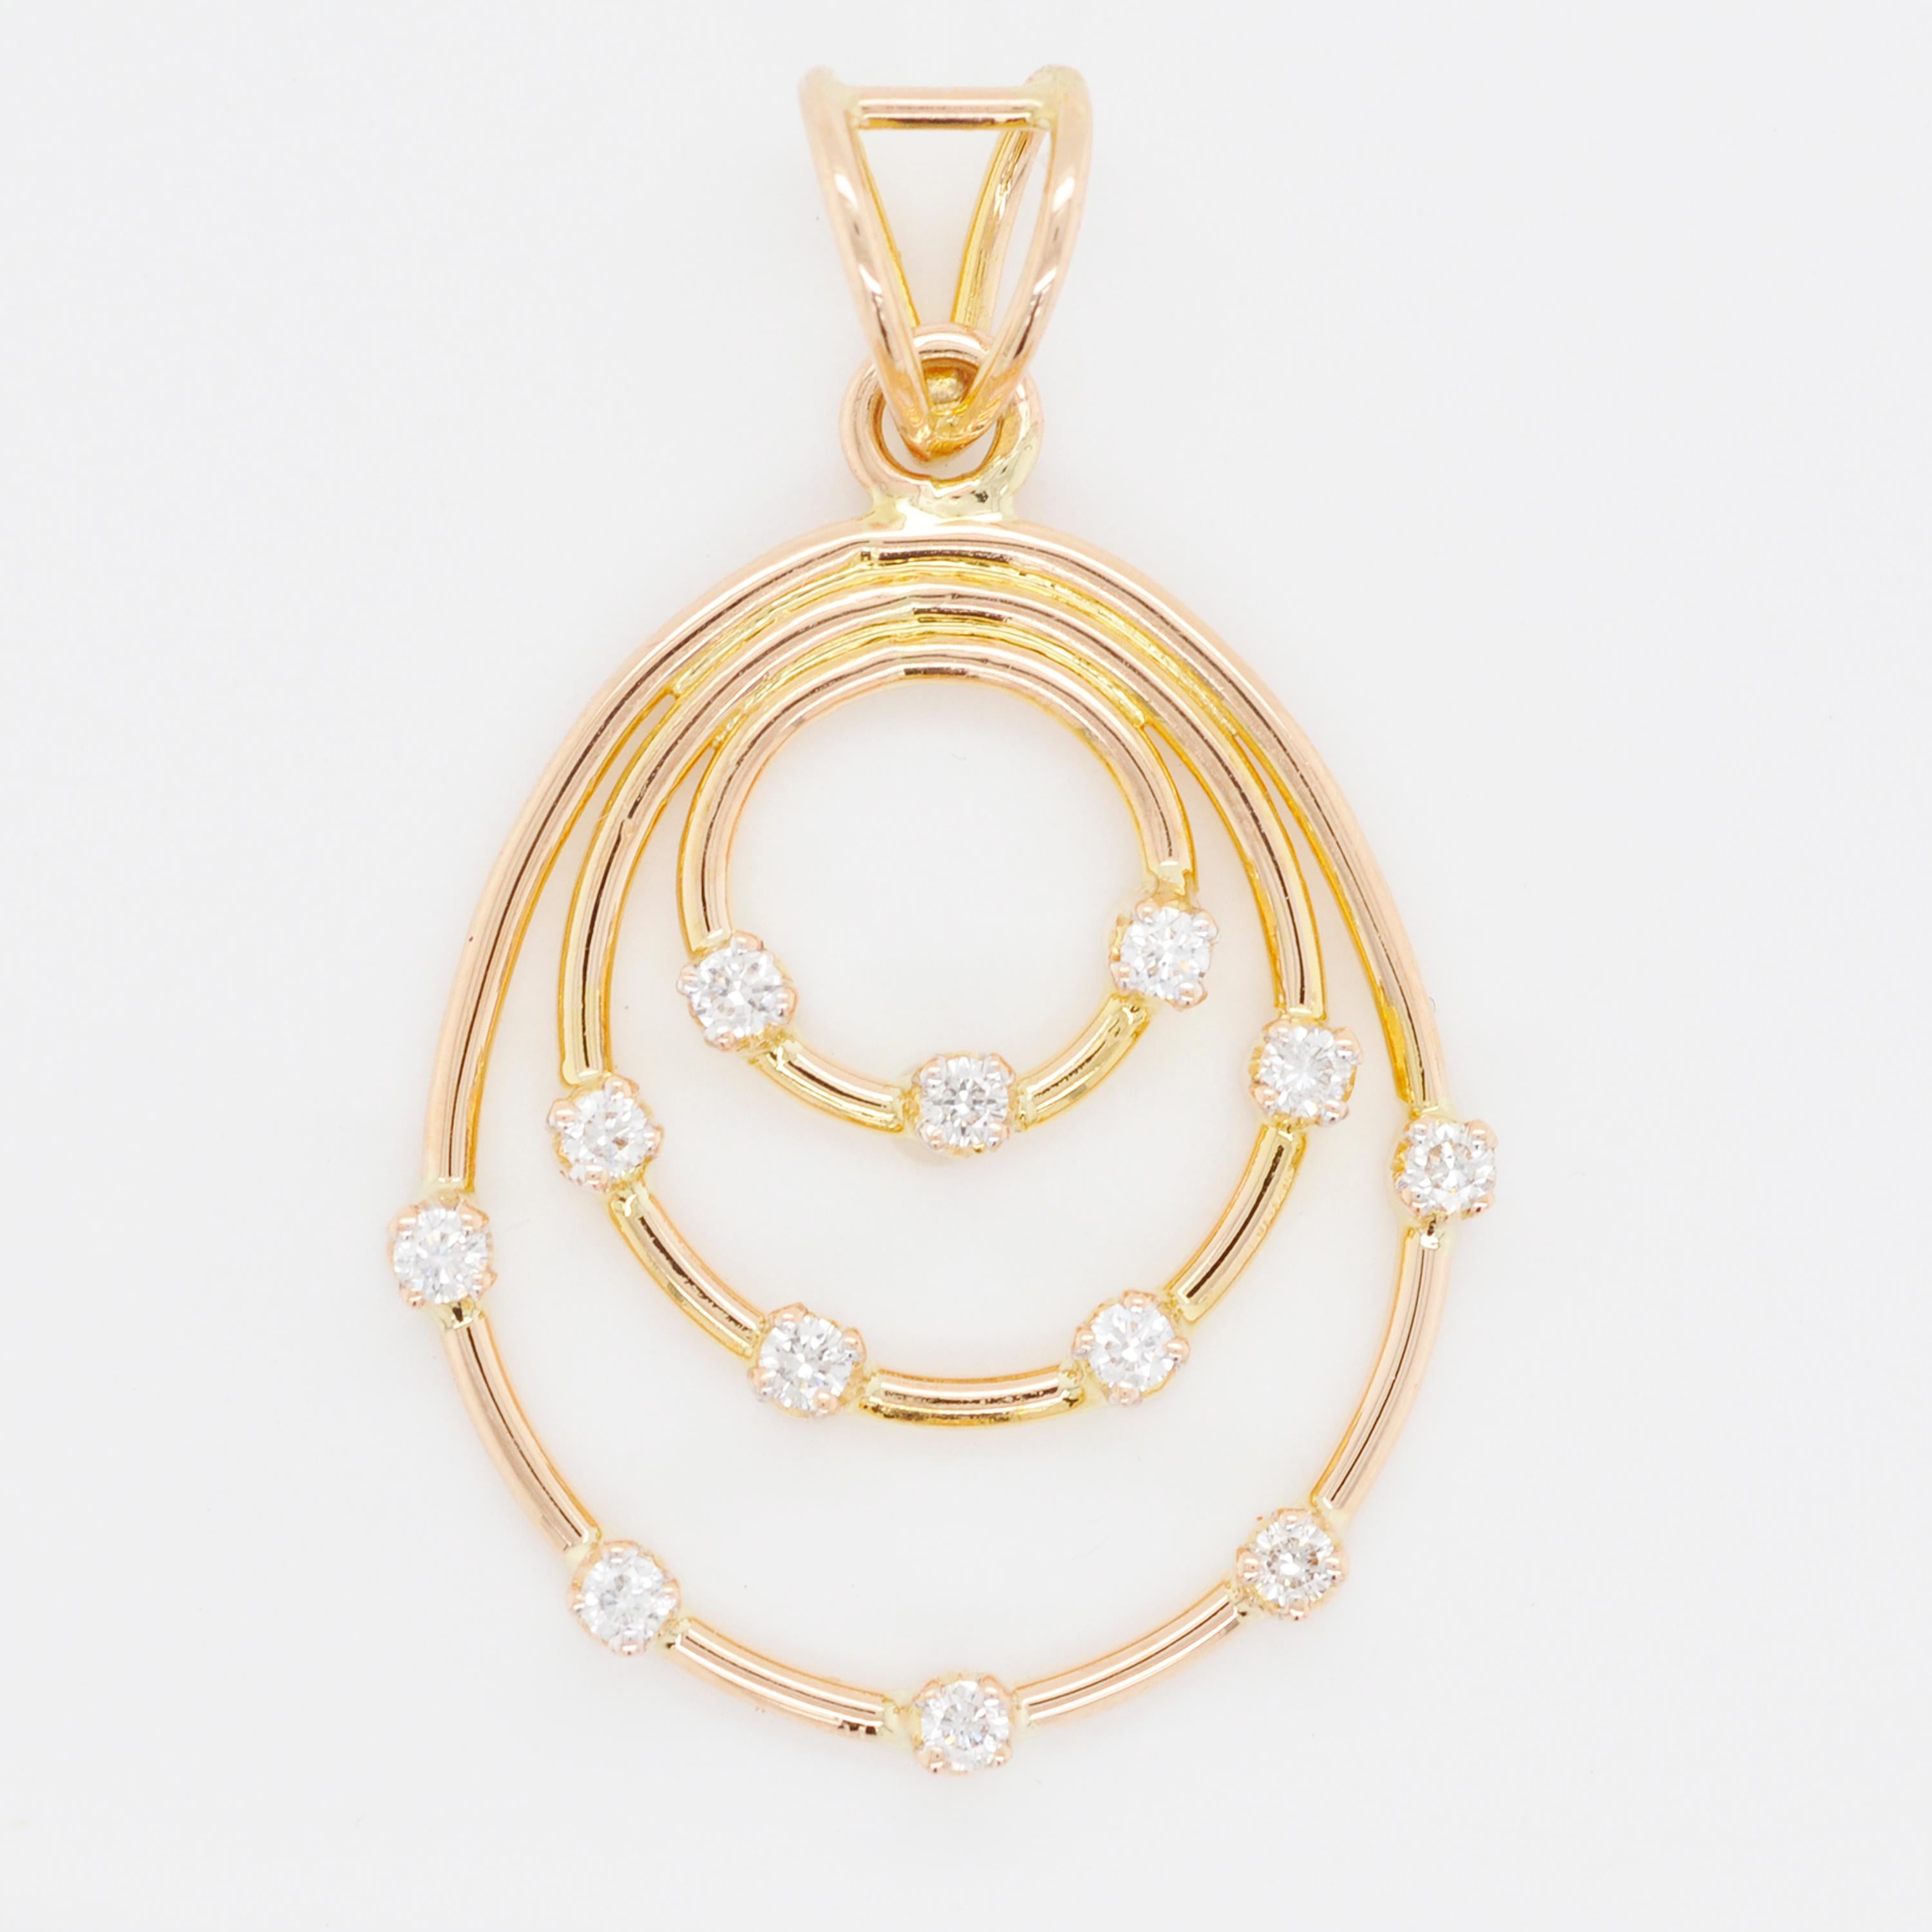 18 Karat Gold Diamond Art Deco Style Pendant Necklace In New Condition For Sale In Jaipur, Rajasthan